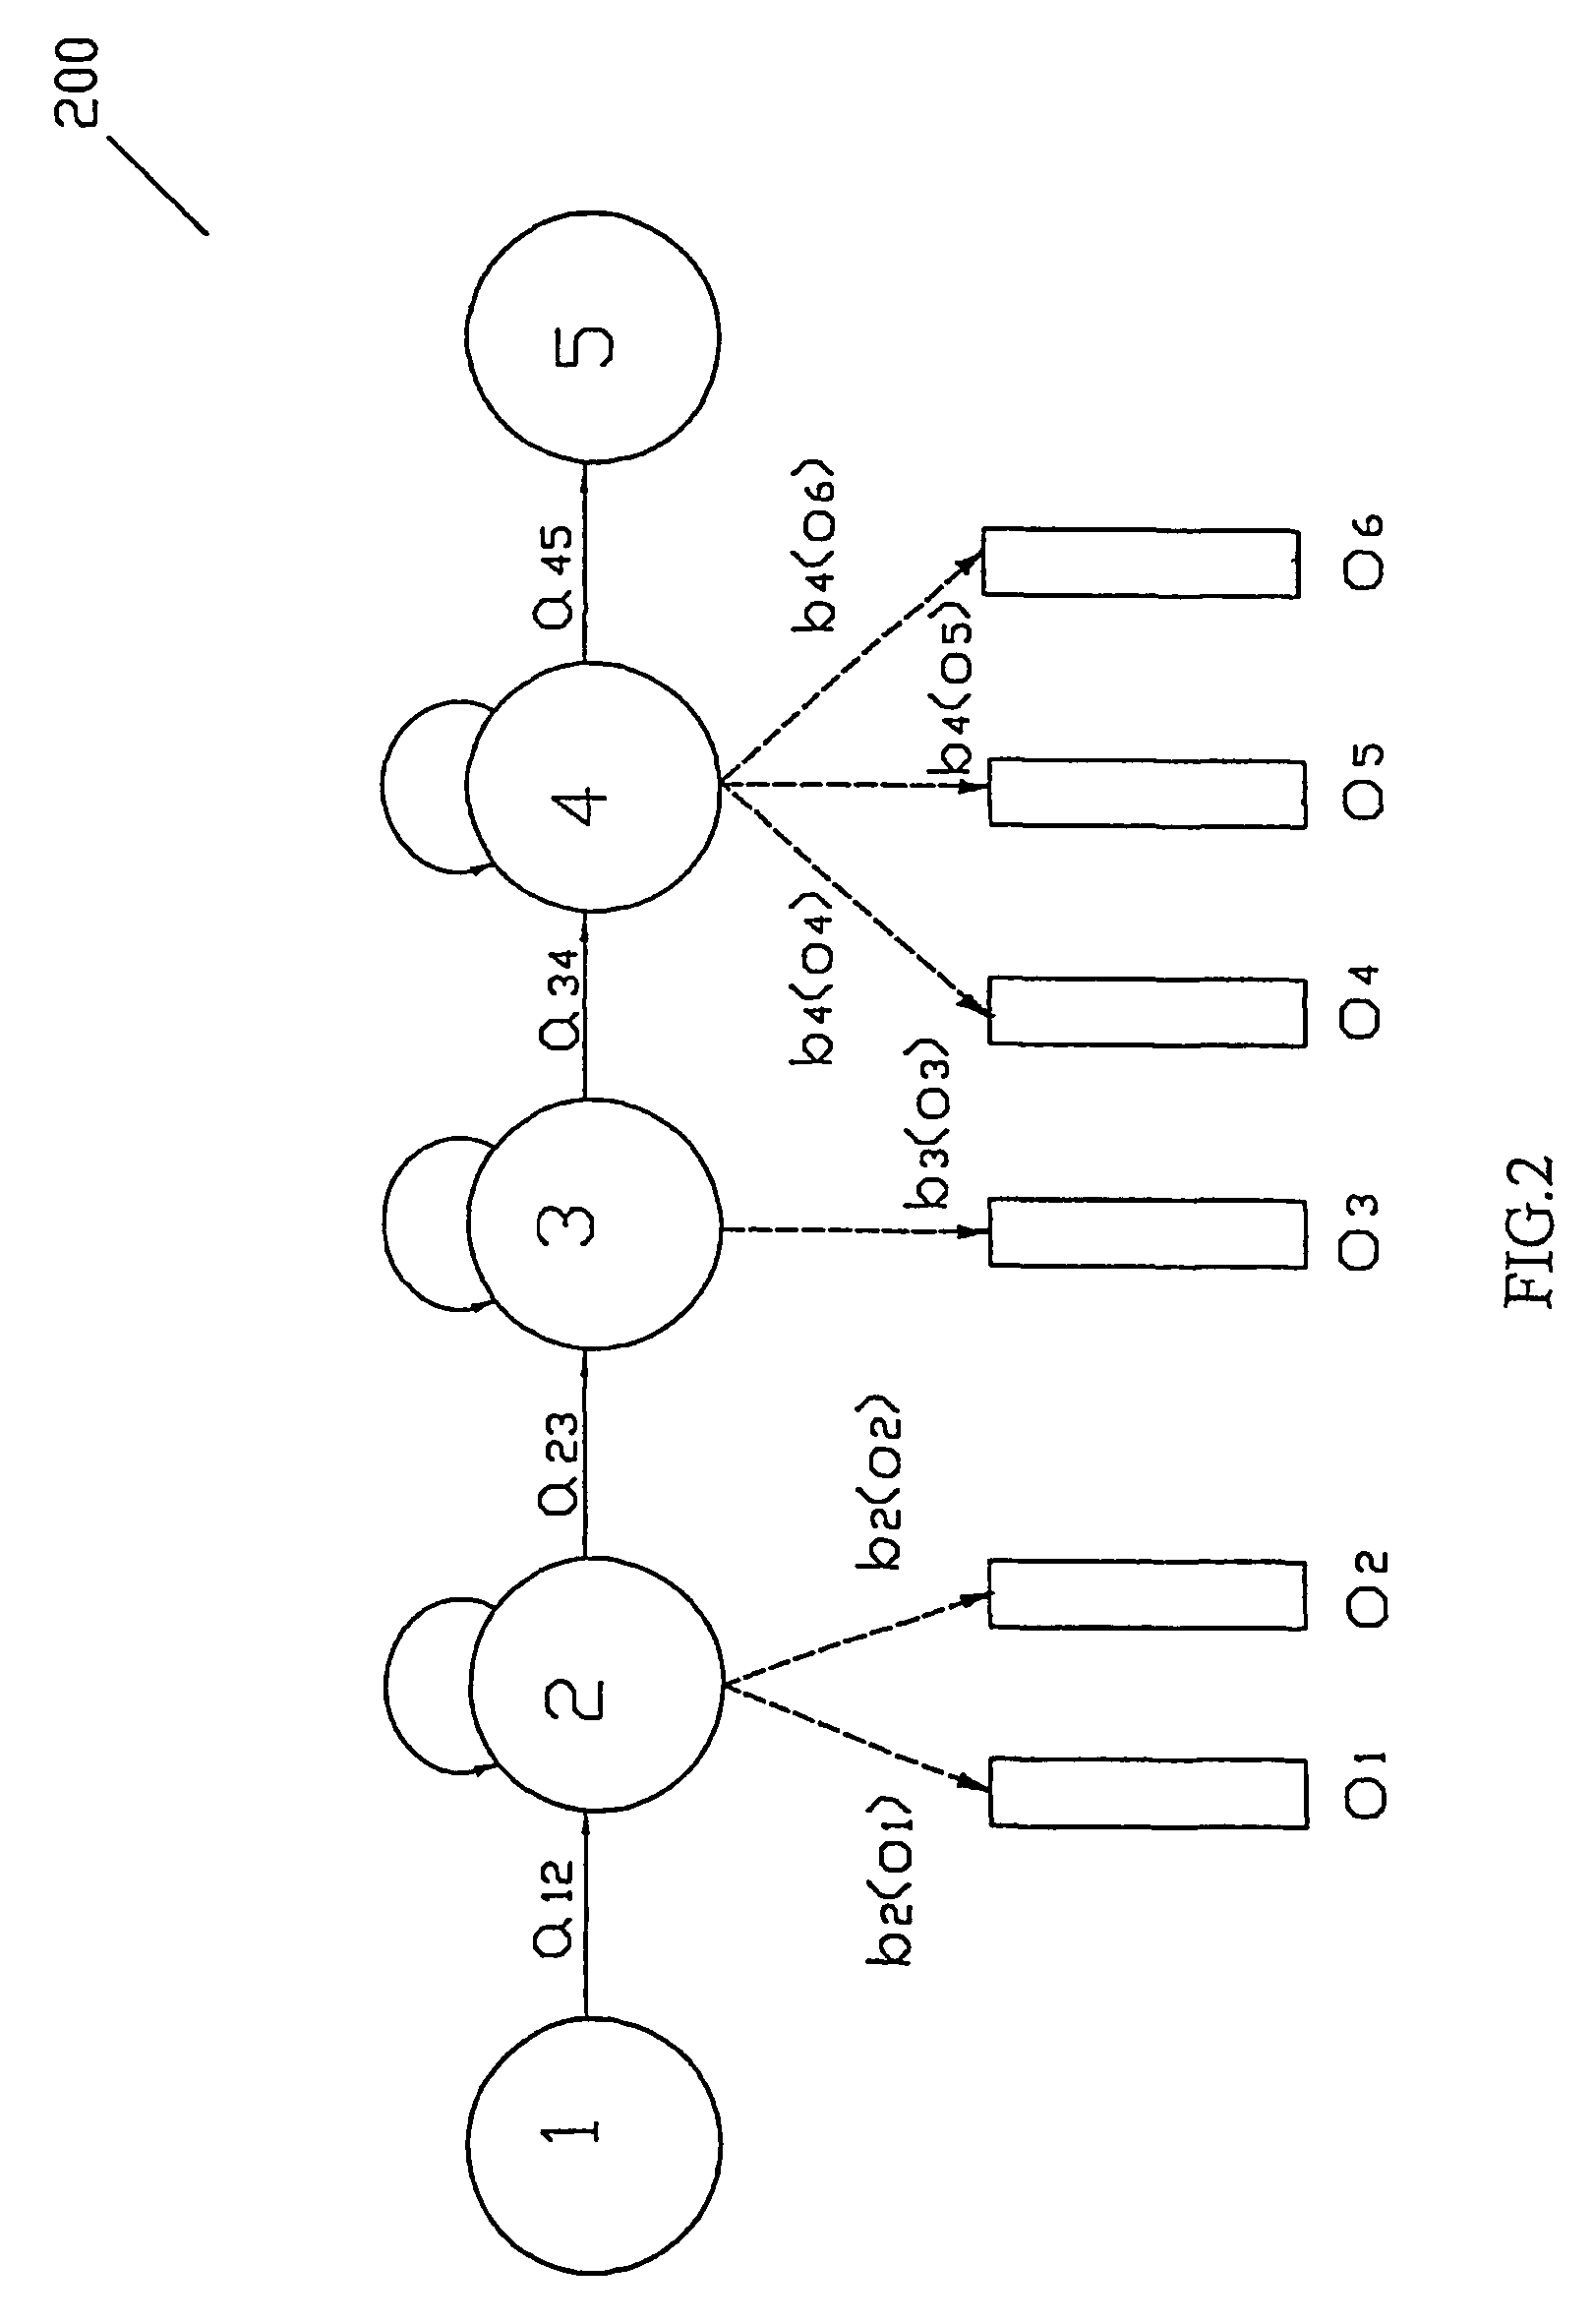 Method, apparatus, and system for building context dependent models for a large vocabulary continuous speech recognition (LVCSR) system